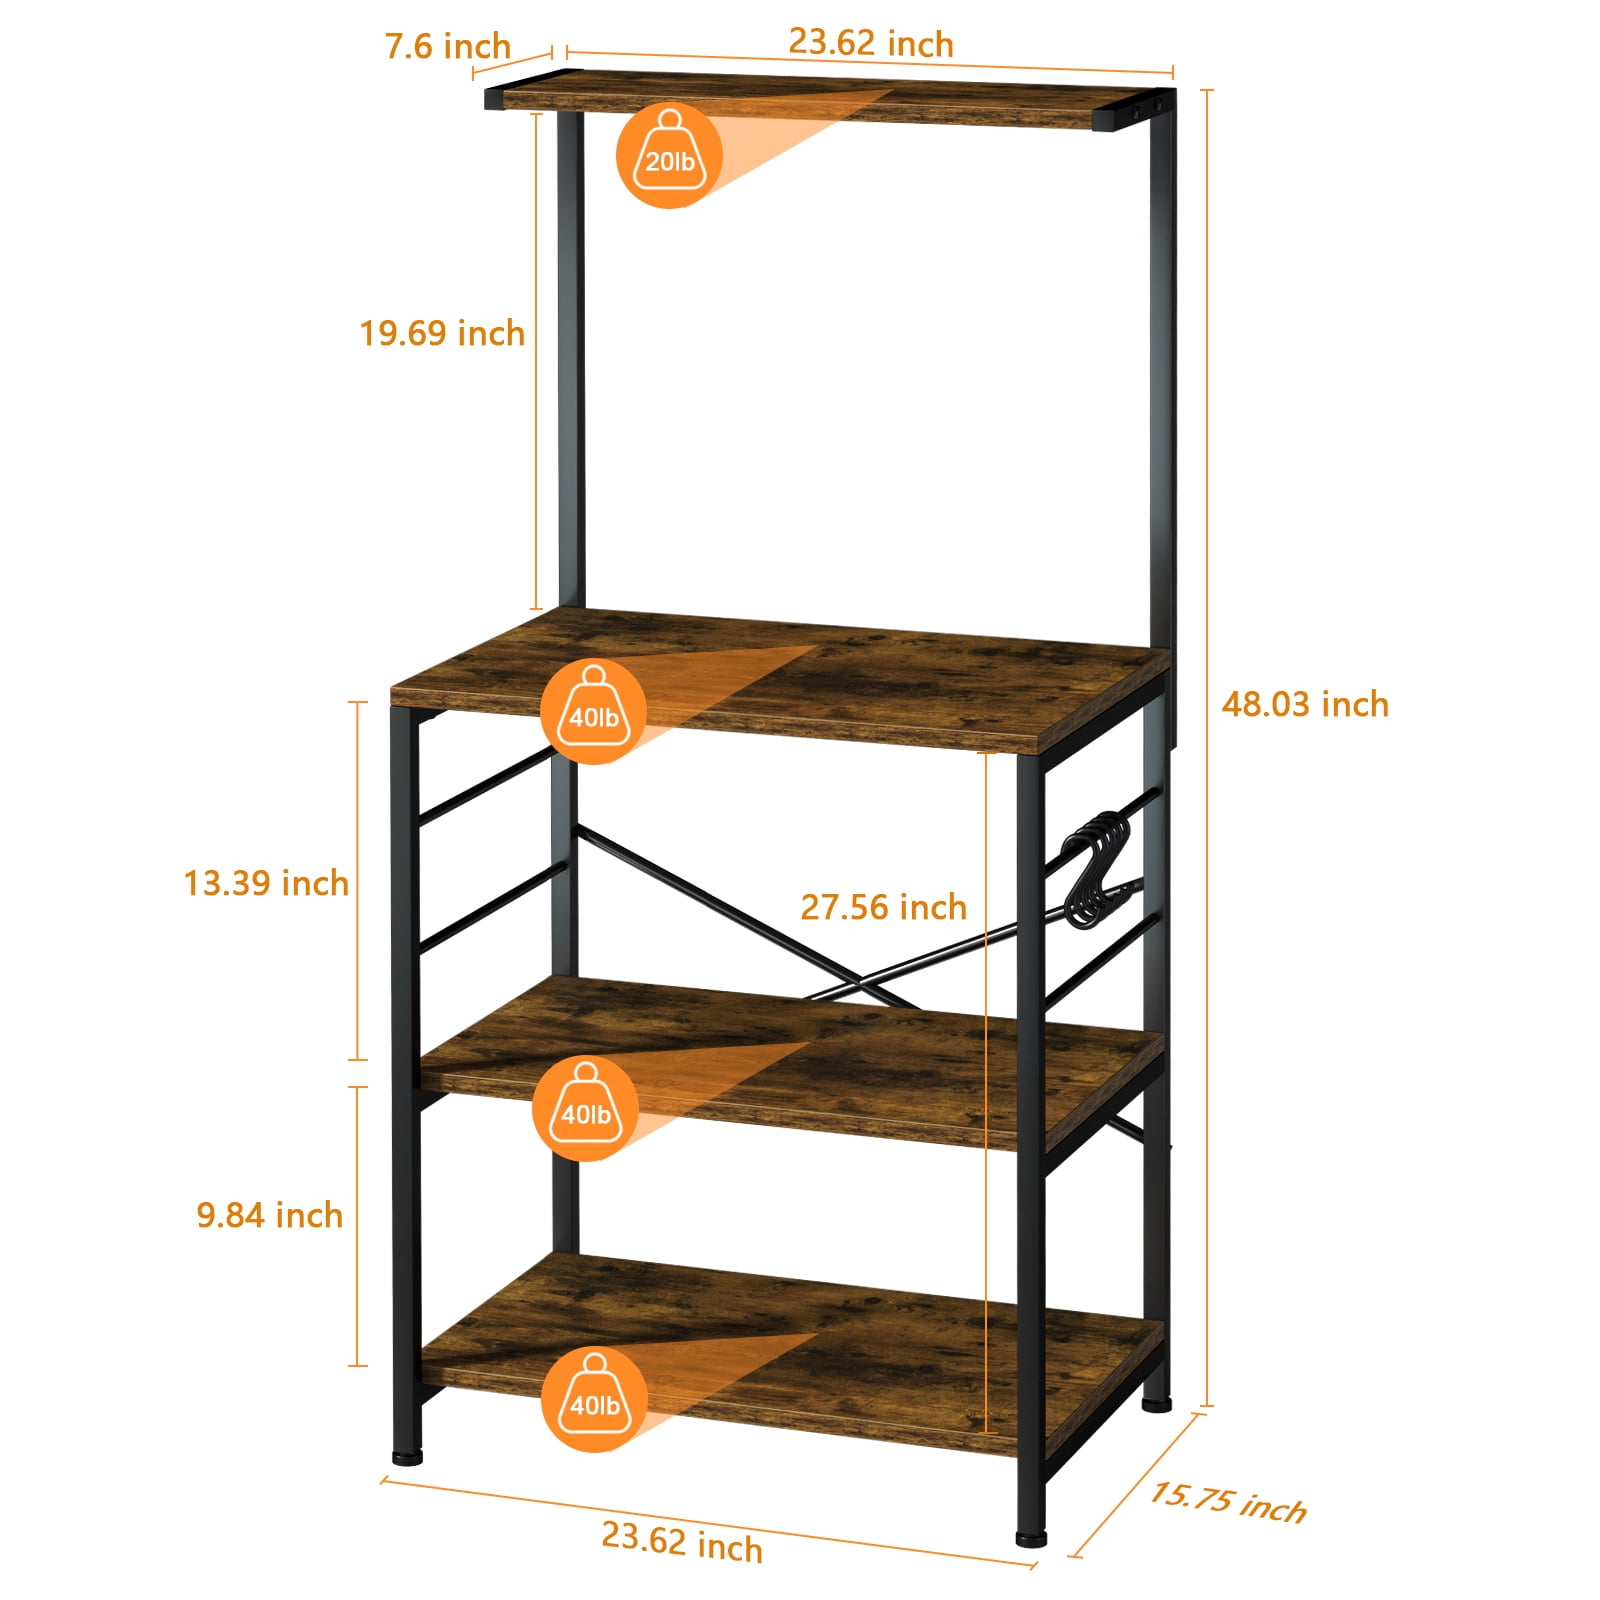  VZIUDYN 4-Tier Bakers Racks for Kitchens, Kitchen Storage  cabinets Microwave Stand with Storage, Coffee Bar Cabinet, Kitchen Shelves  for Spices, Pots and Pans - Standing Baker's Racks